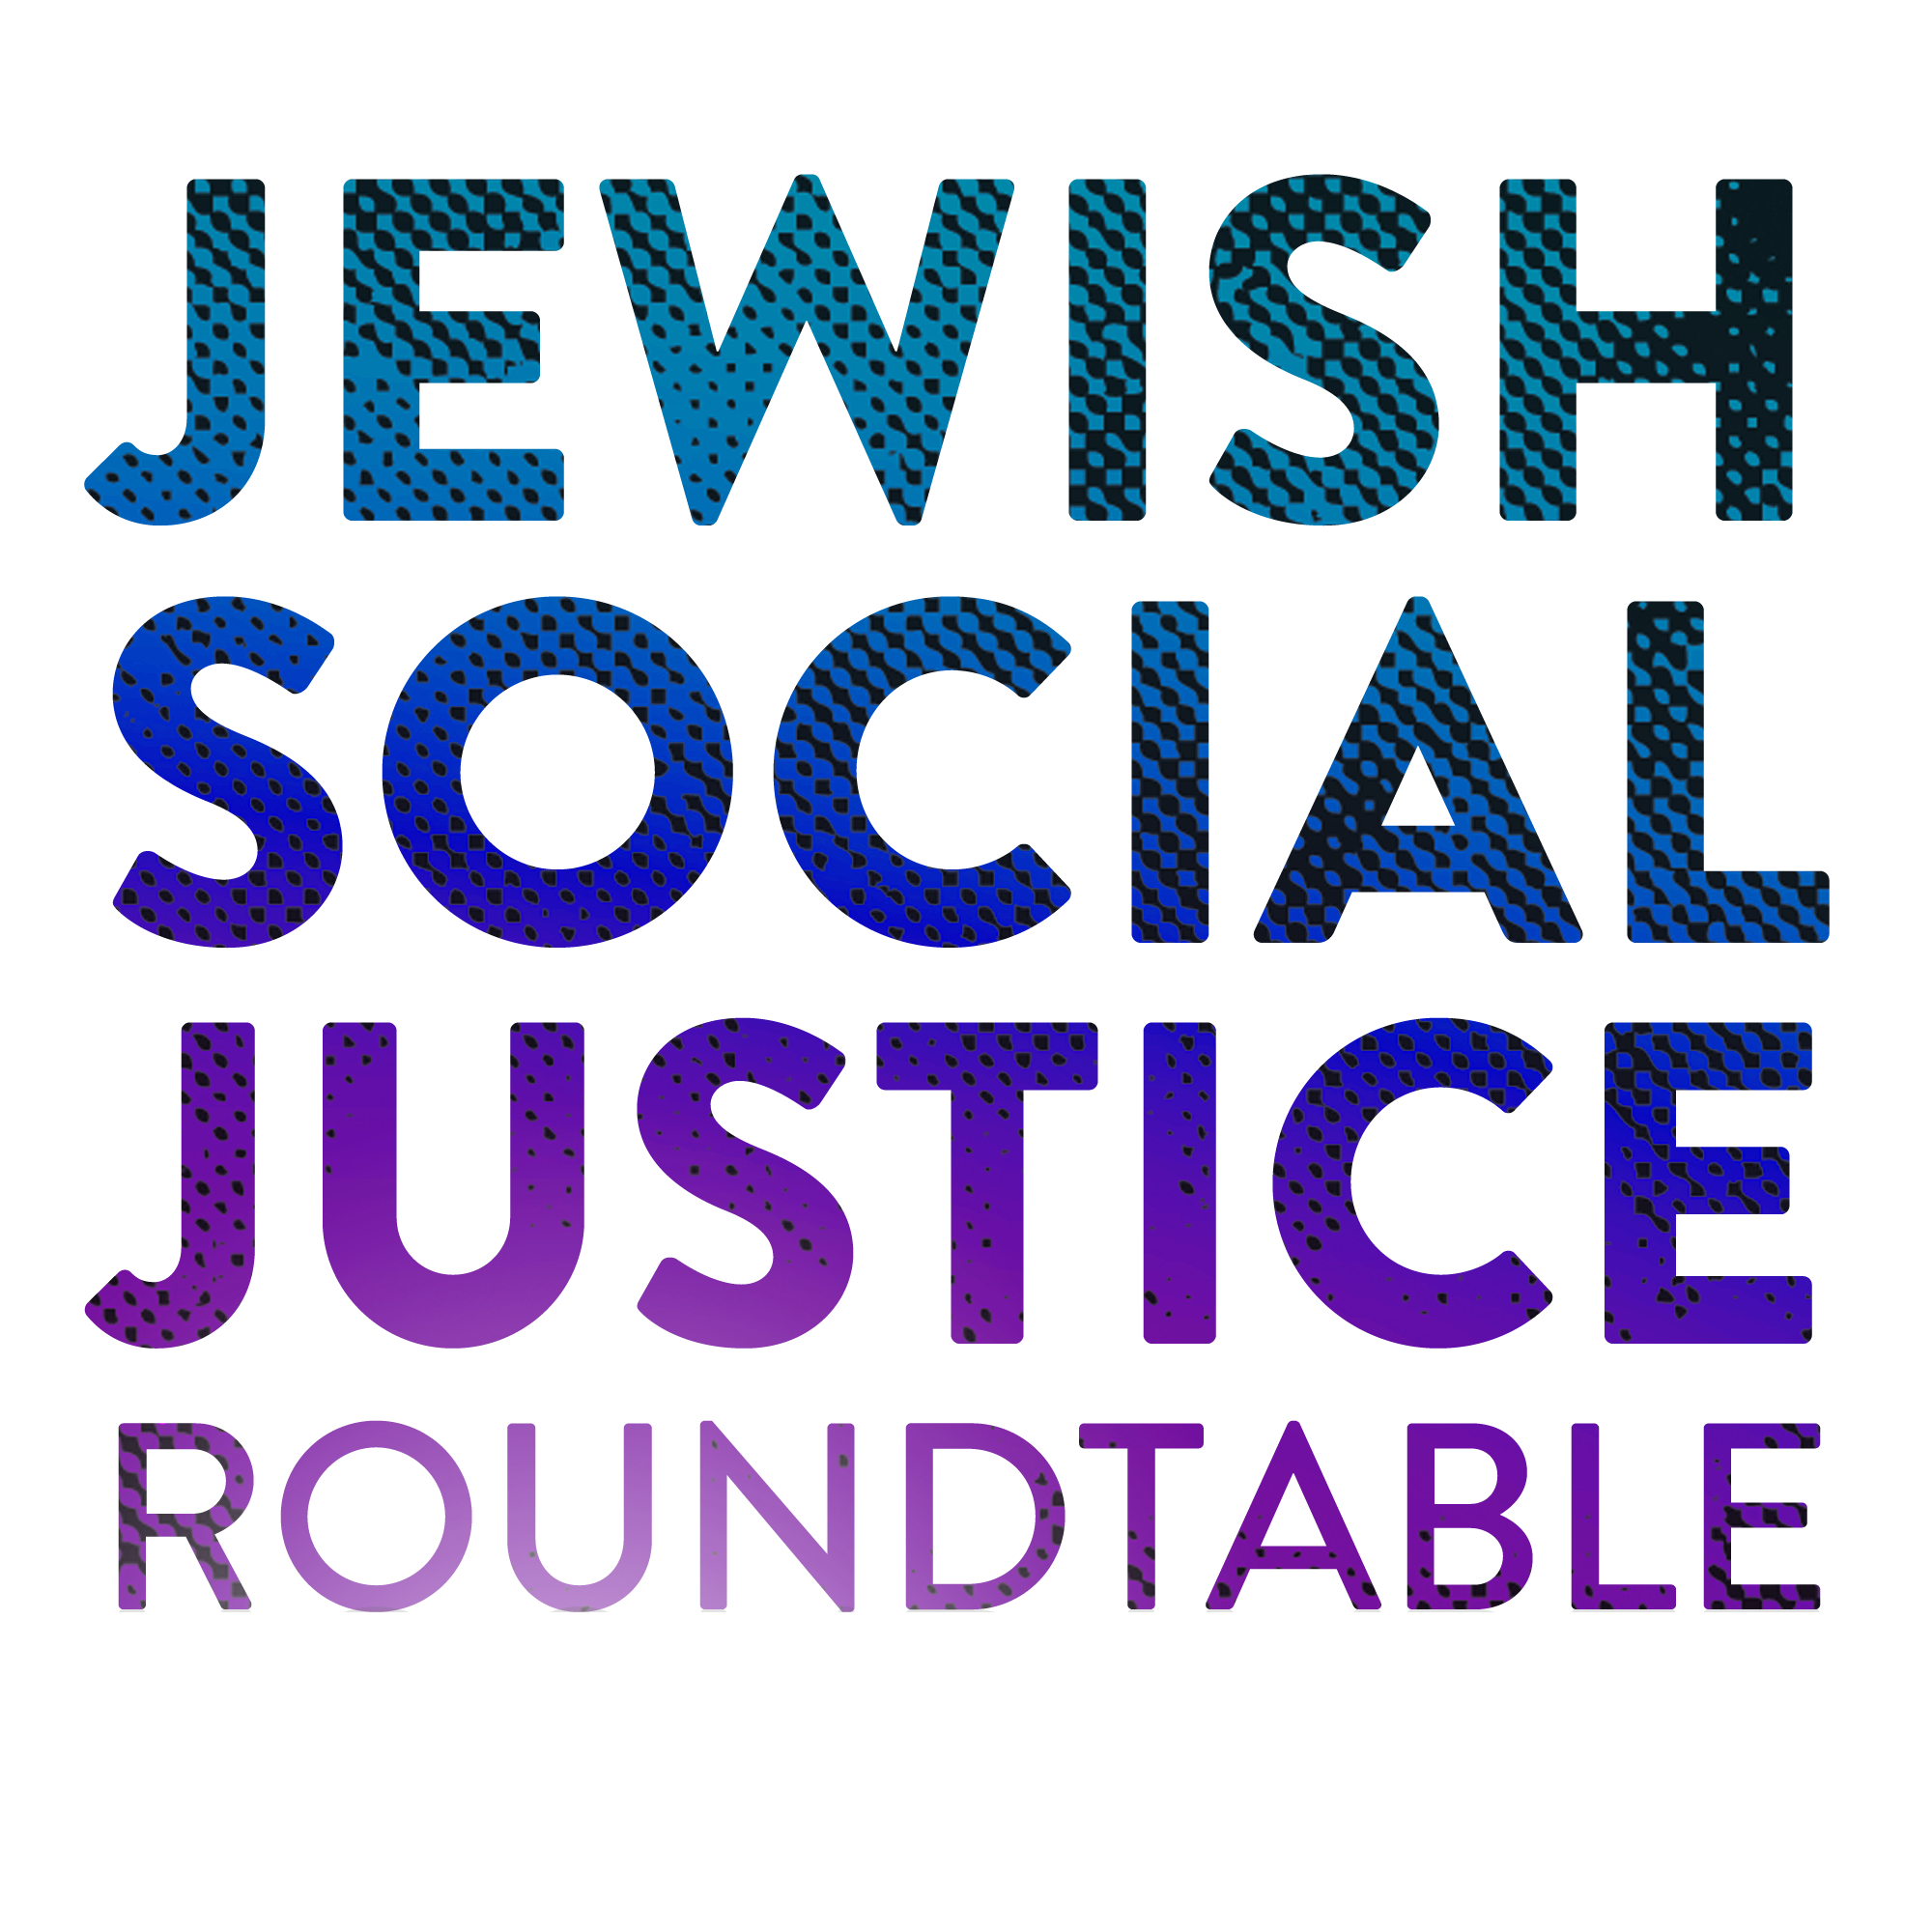 Jewish Social Justice Roundtable